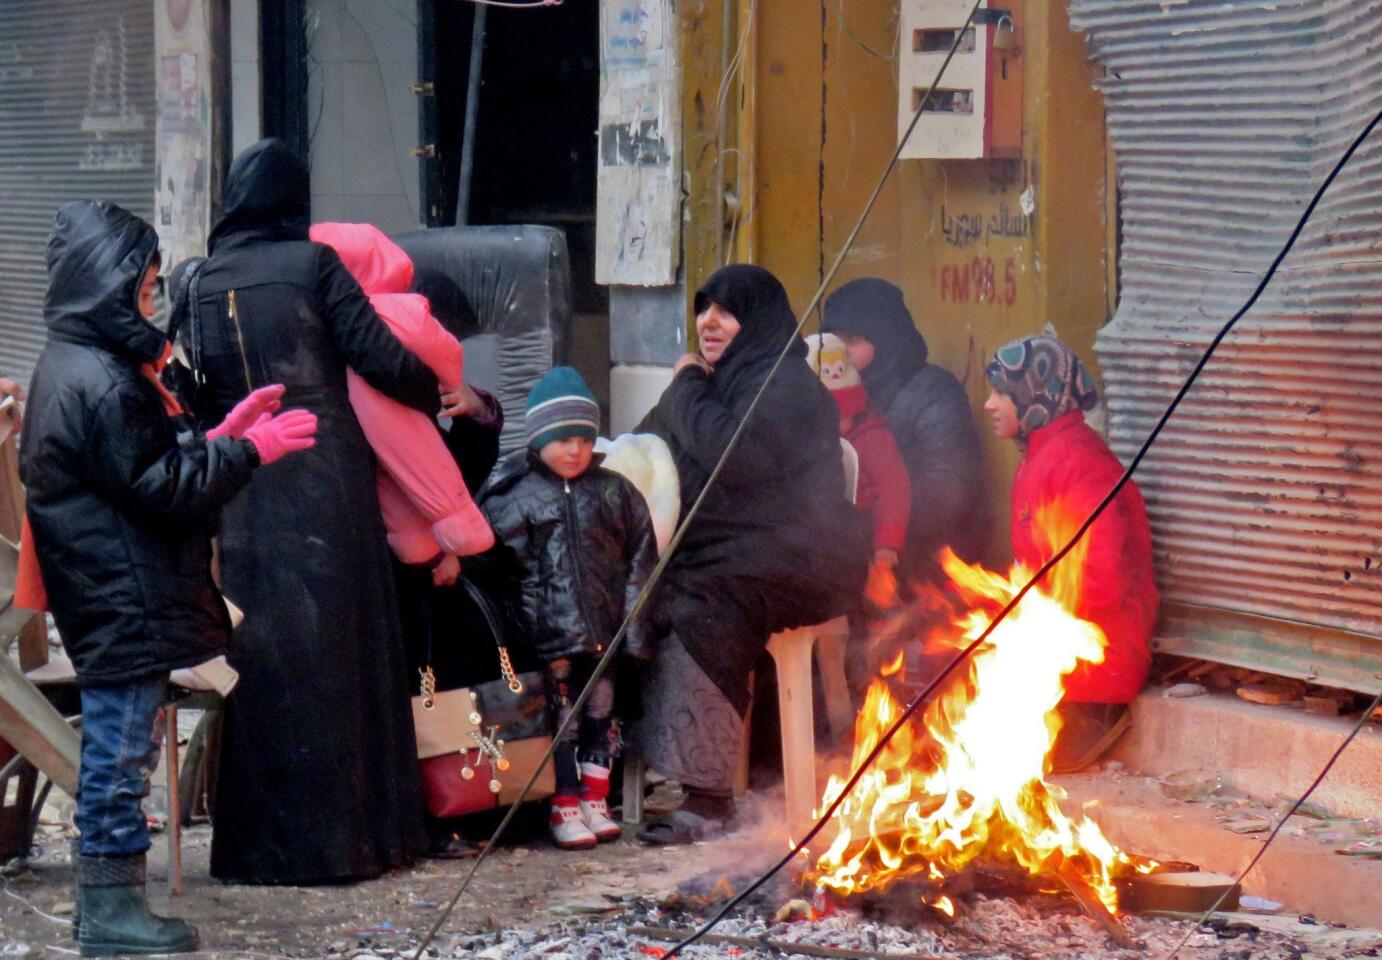 ‘Nowhere safe to run’ for residents fleeing Aleppo